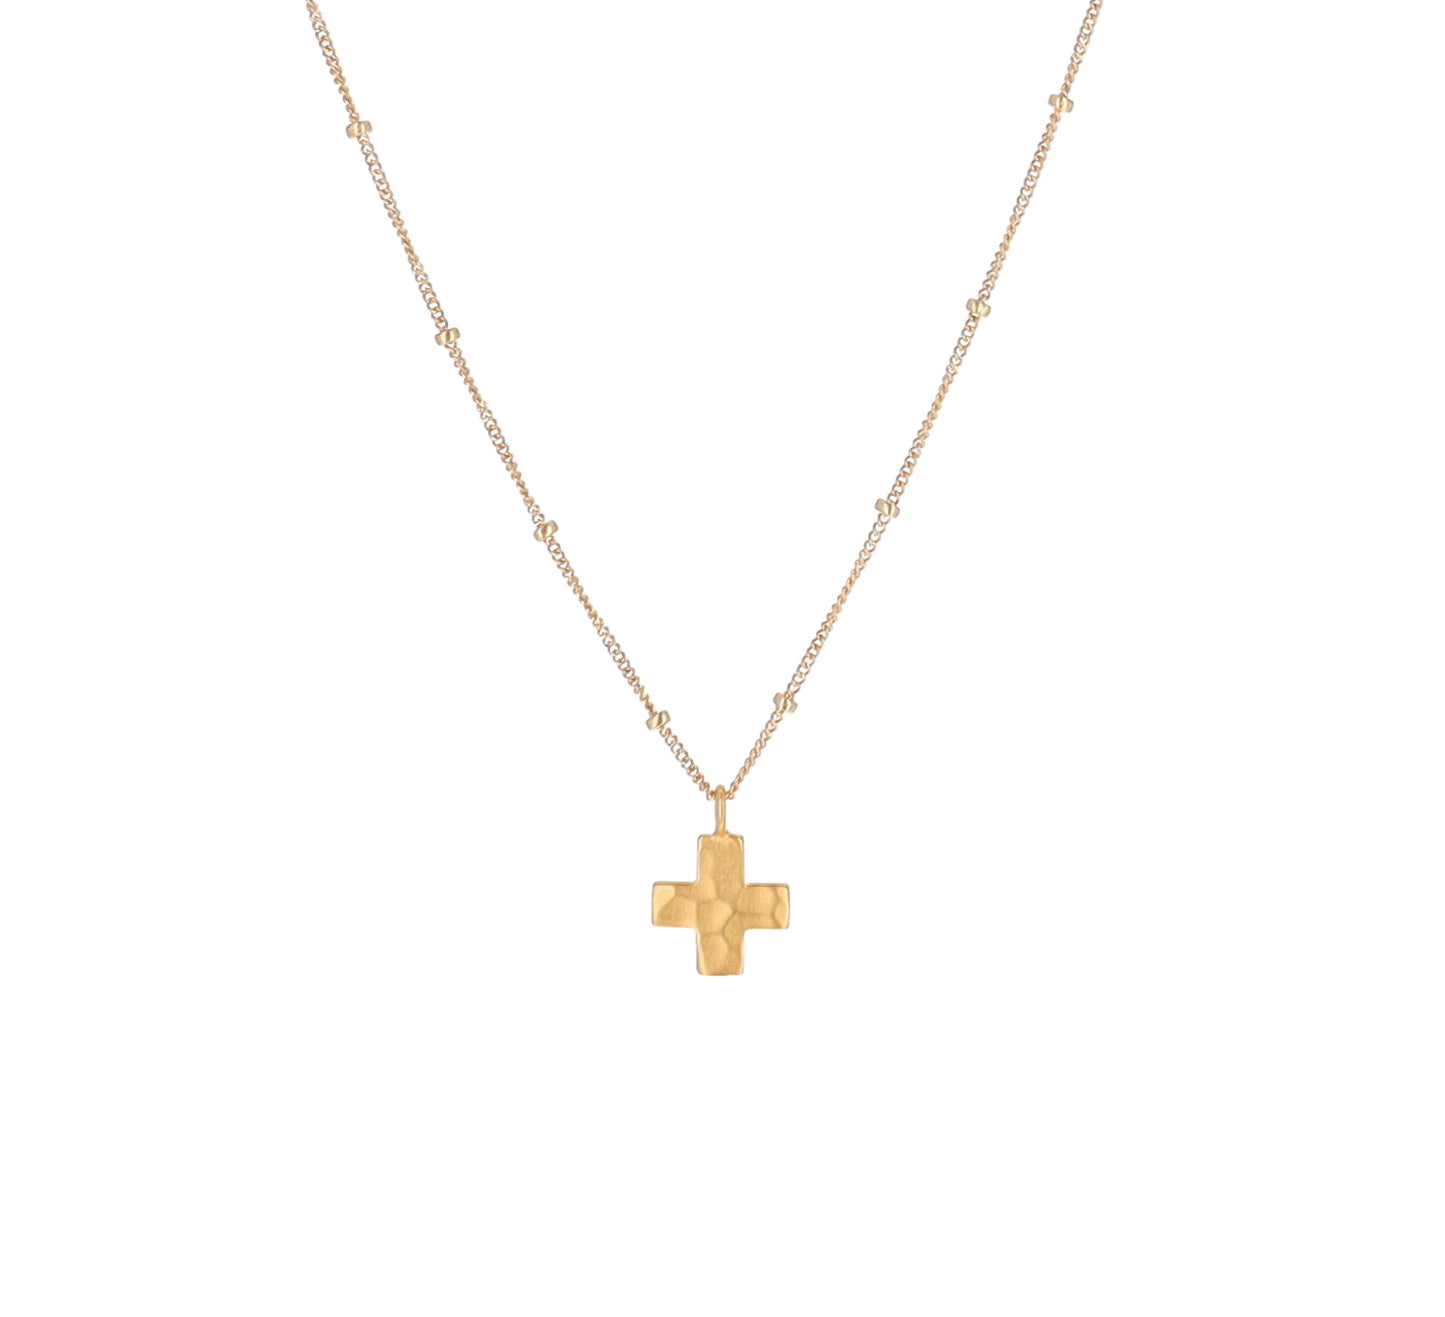 Gold Equilateral Cross Charm Necklace